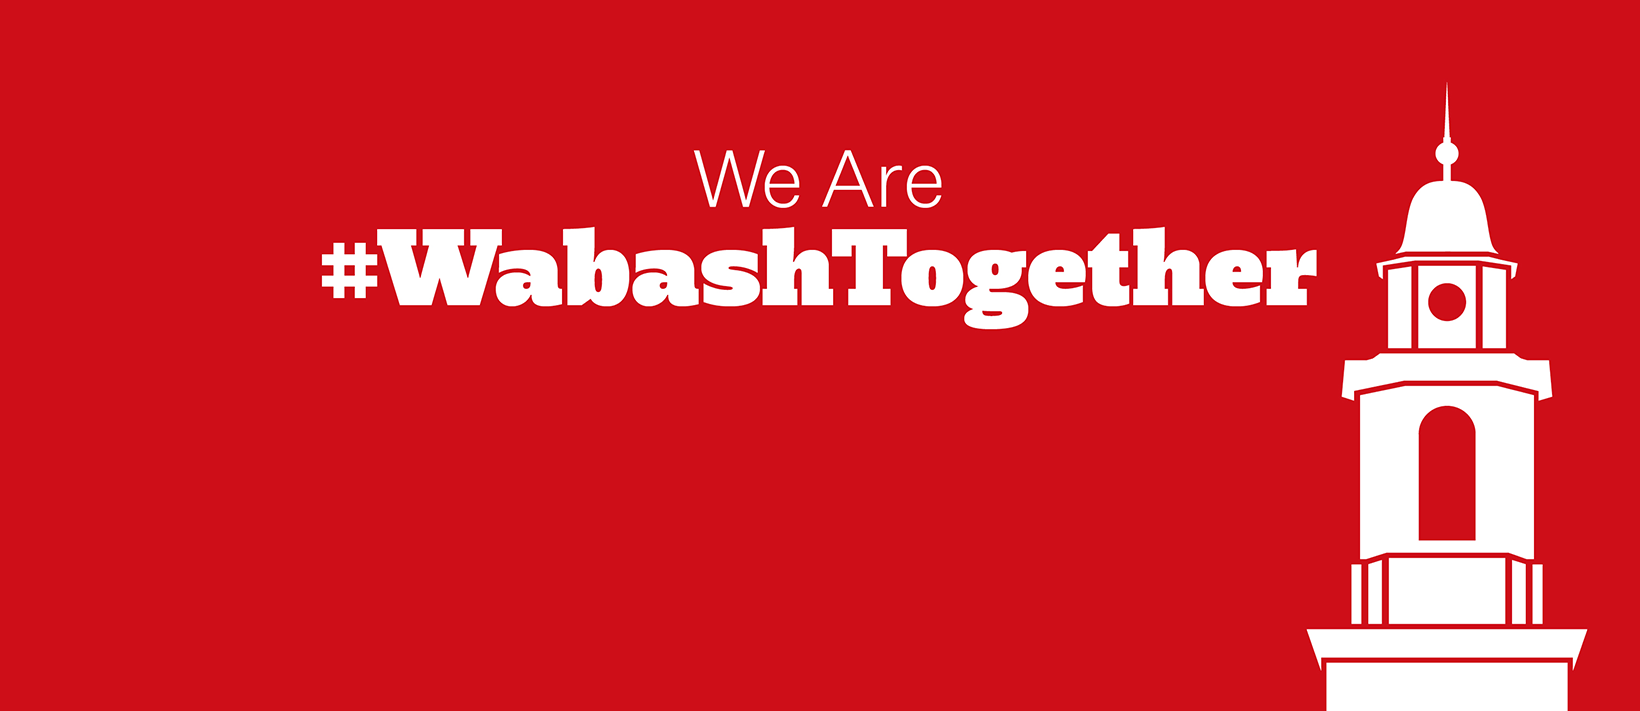 Wabash Day of Giving - Facebook Cover Photo 2